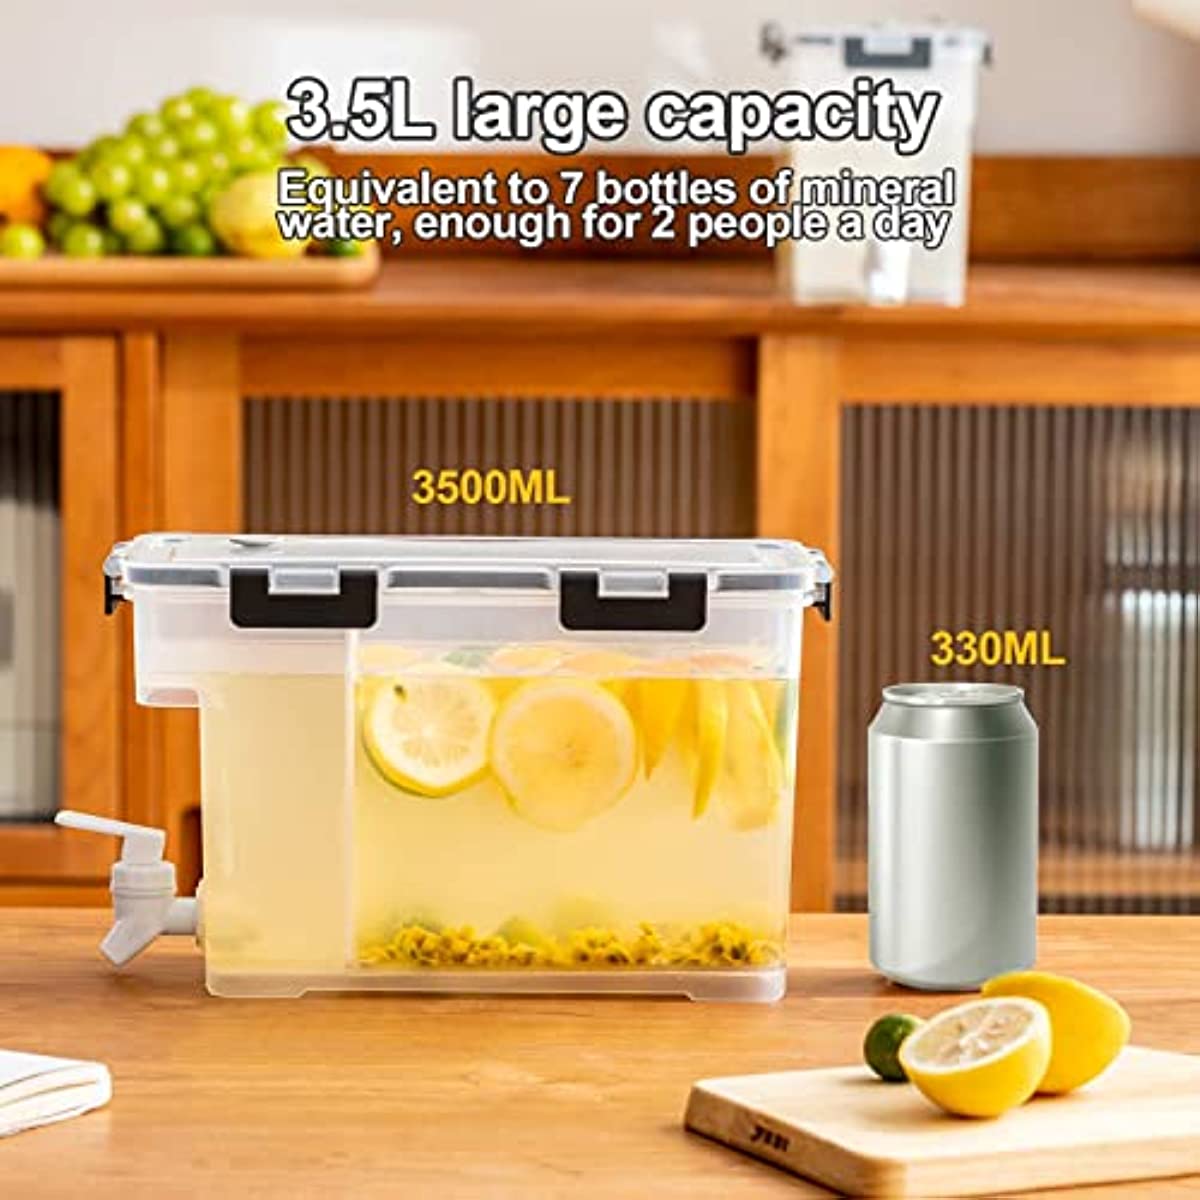 3.5L Large Capacity Kettle with Faucet Iced Beverage Dispenser